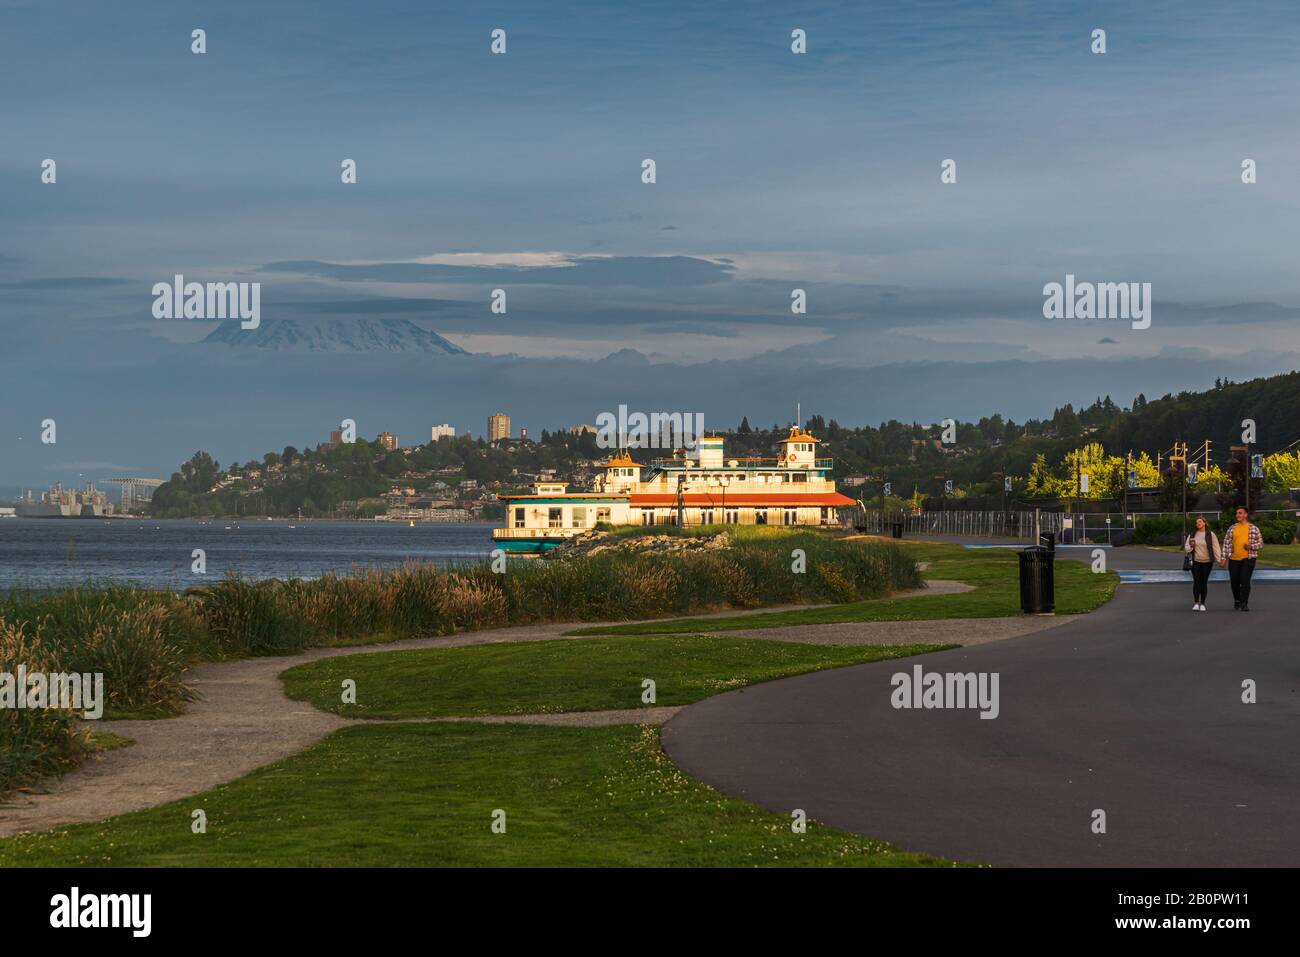 Mt Rainier Hovers Over Downtown Tacoma and Commencement Bay as Seen from Point Ruston with people walking and Riding Bikes Stock Photo